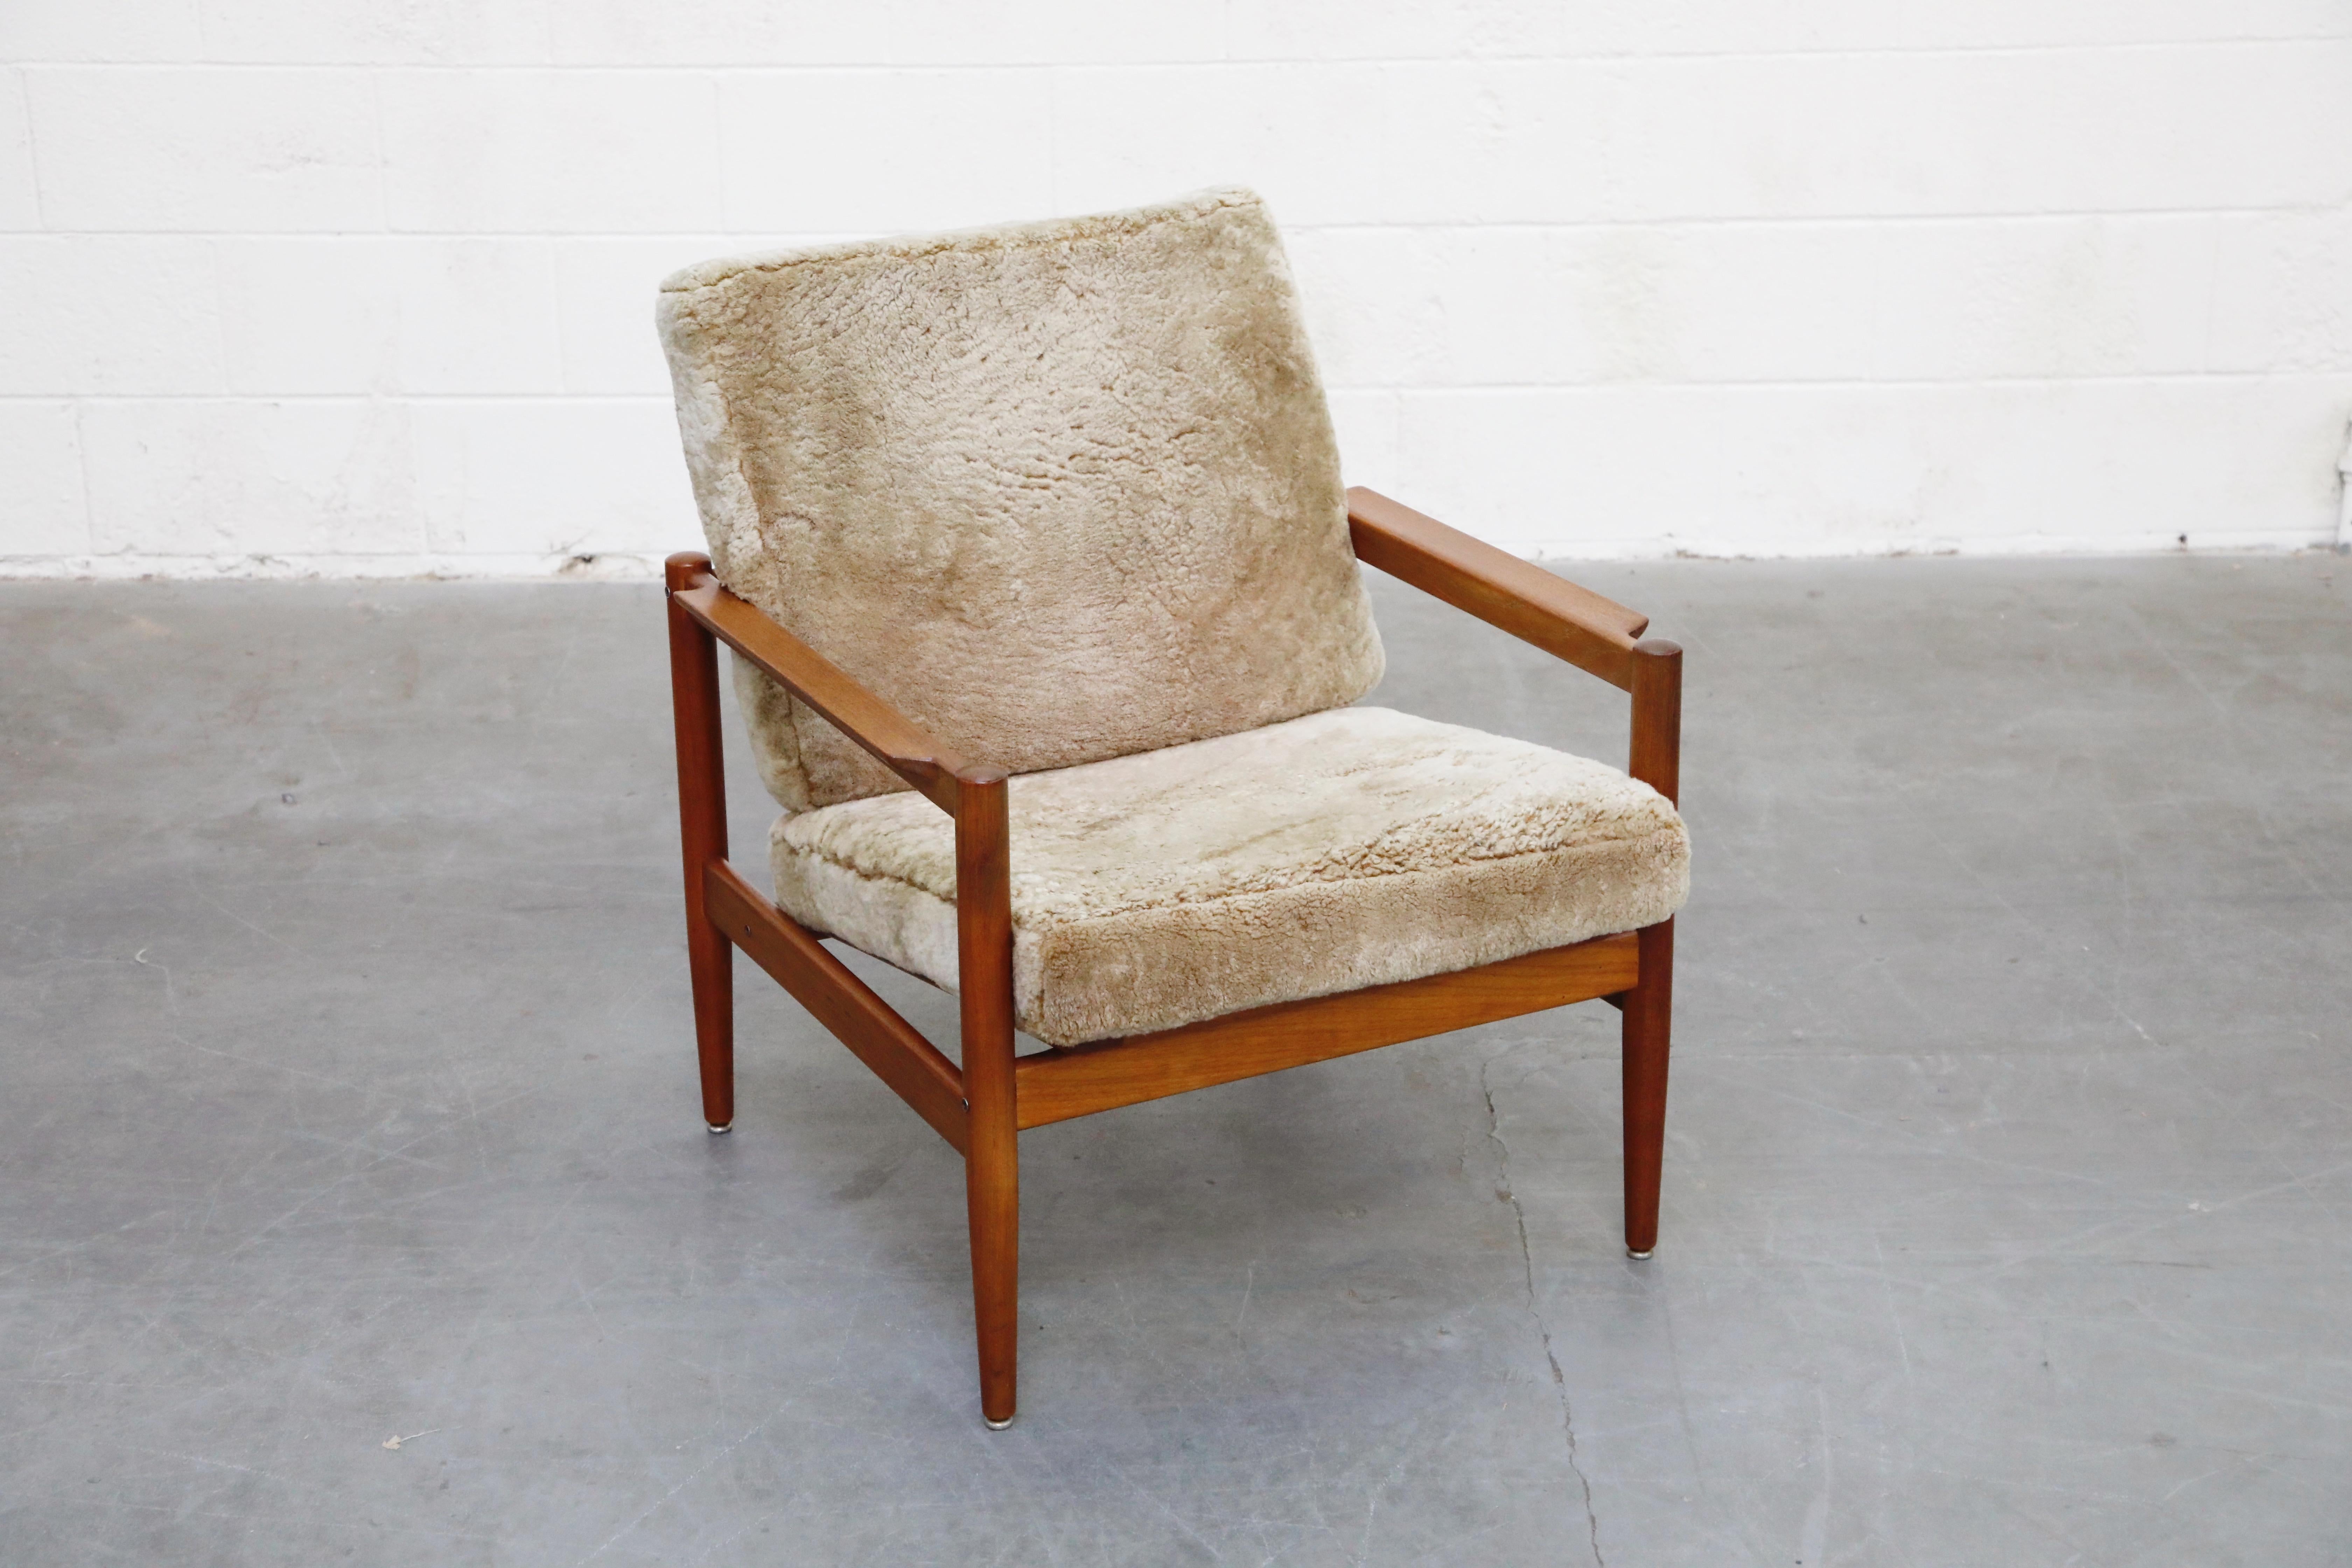 Teak and Shearling Fur Lounge Chairs by Børge Jensen & Sønner, 1960s, Signed 1